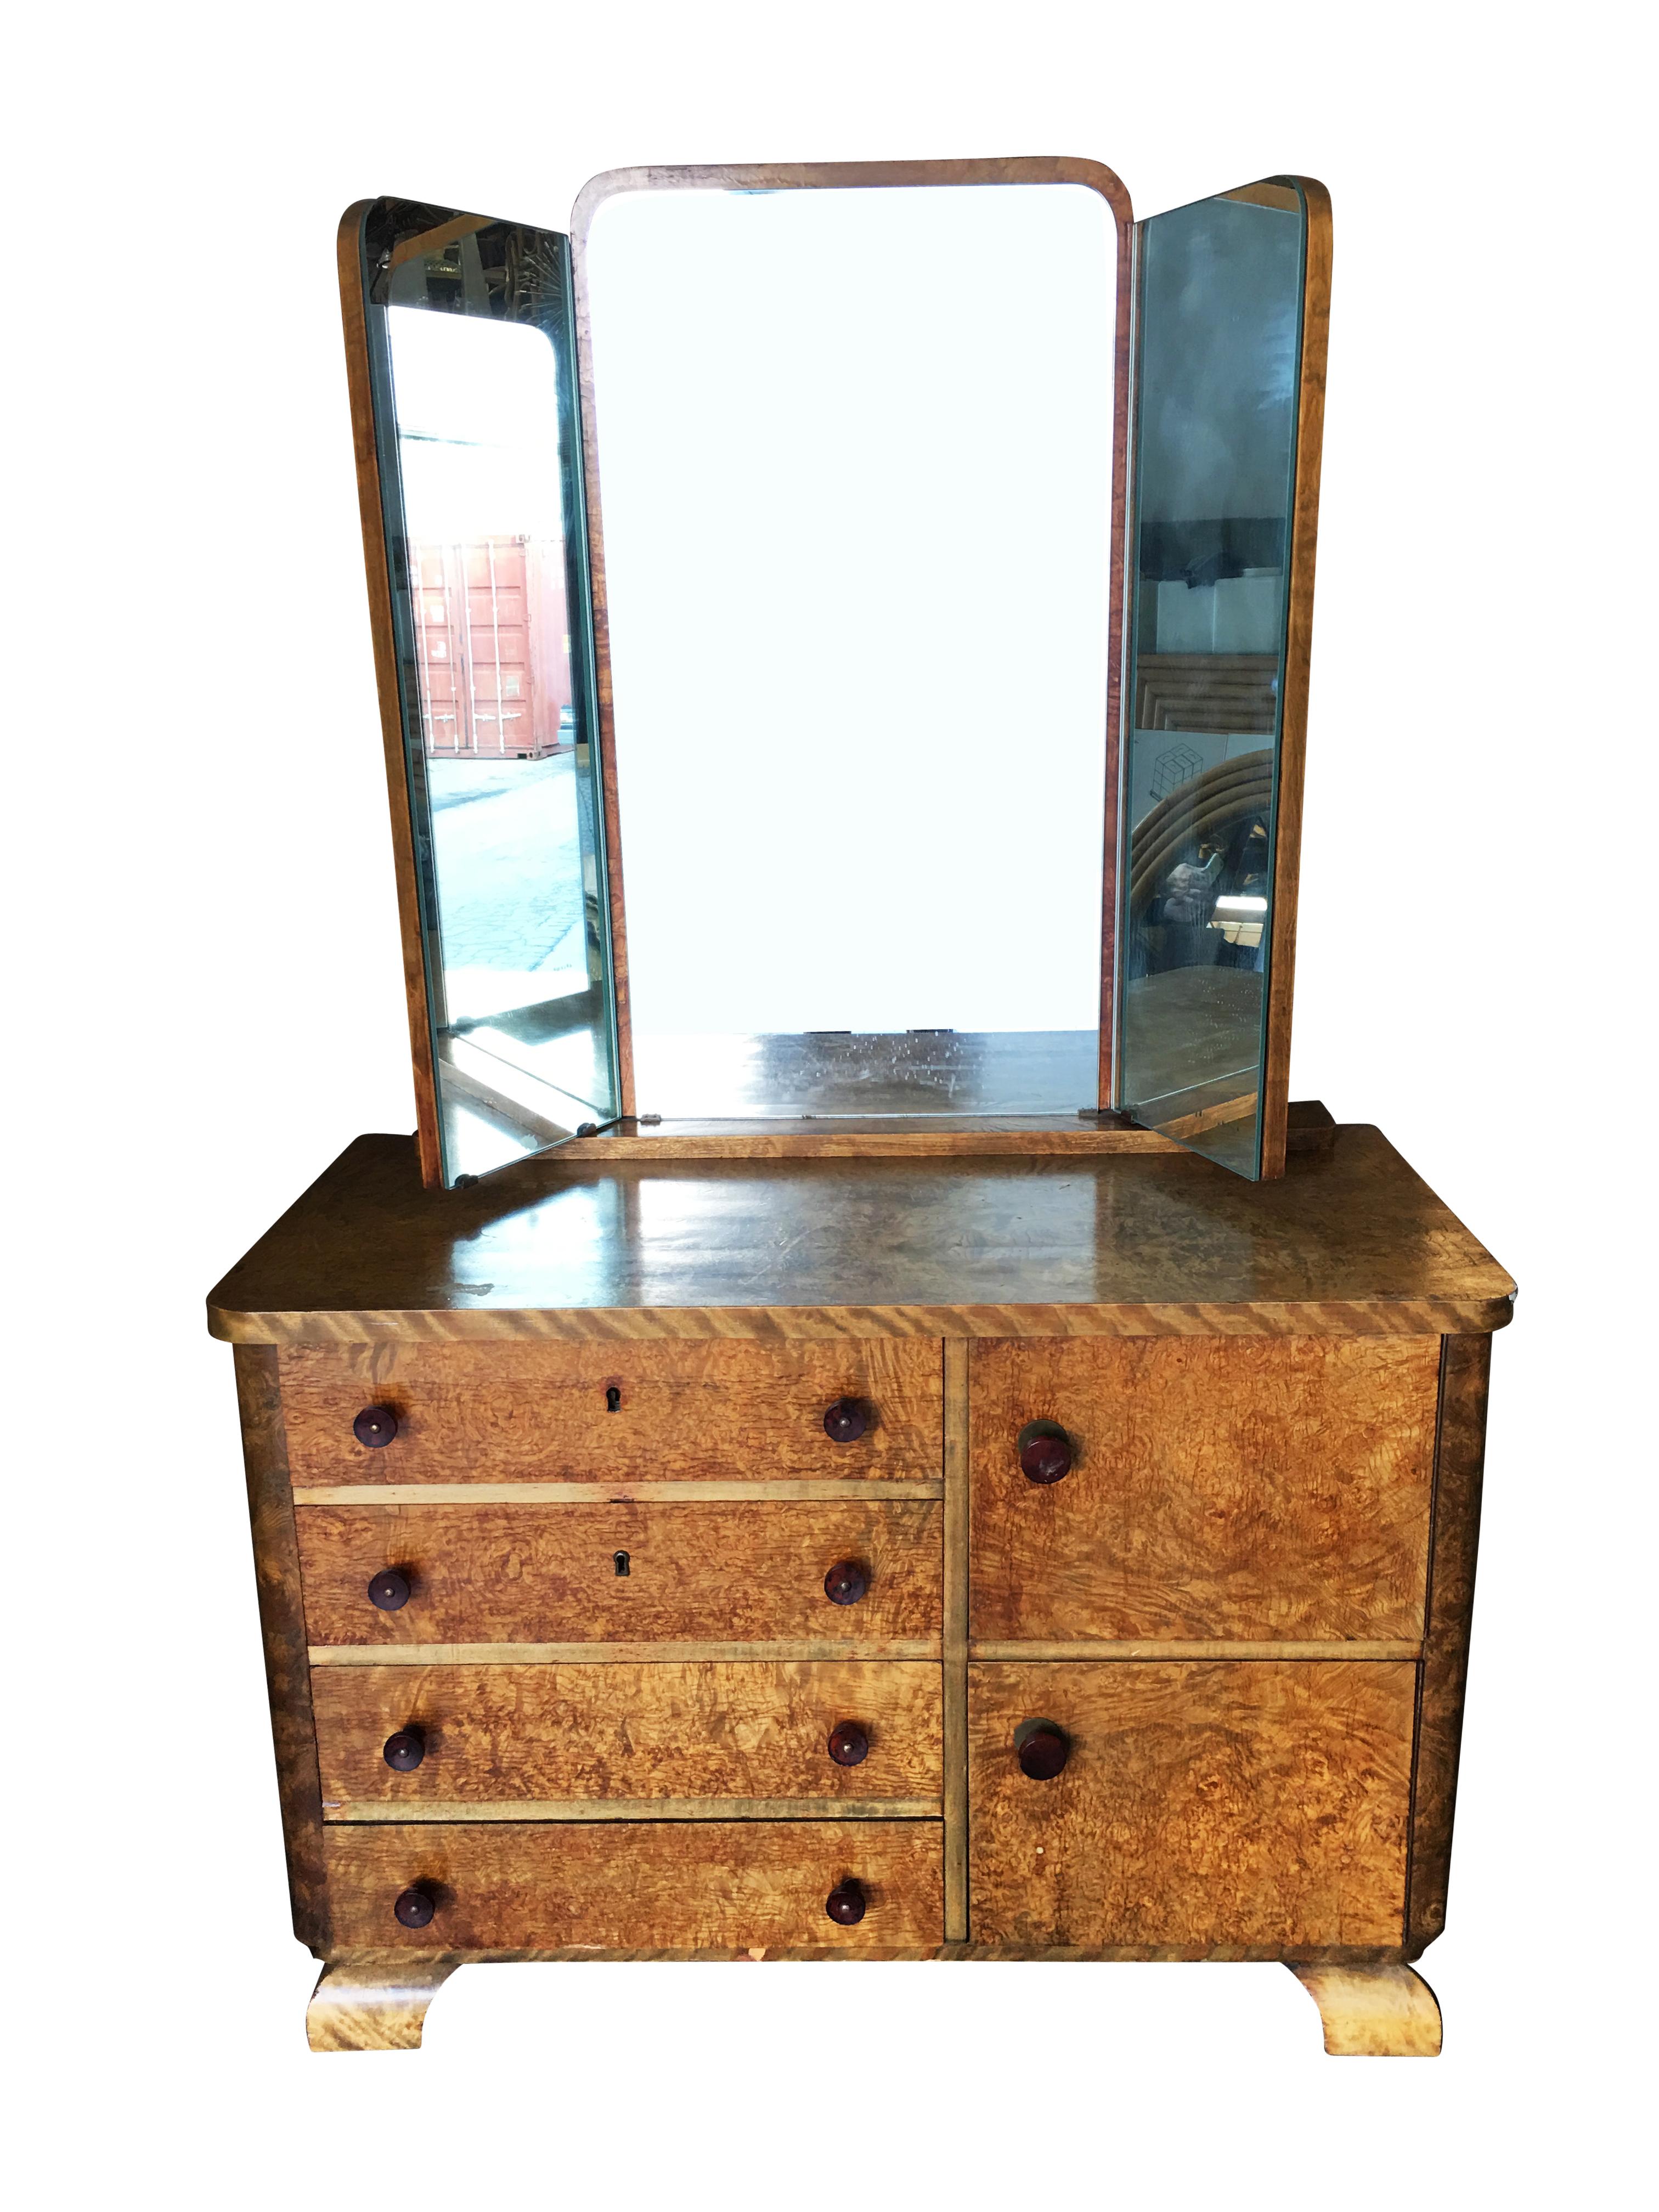 Vintage Art Deco burl wood dresser with tri fold mirror and clear celluloid handles. The dresser features four drawers and 2 small cabinets.